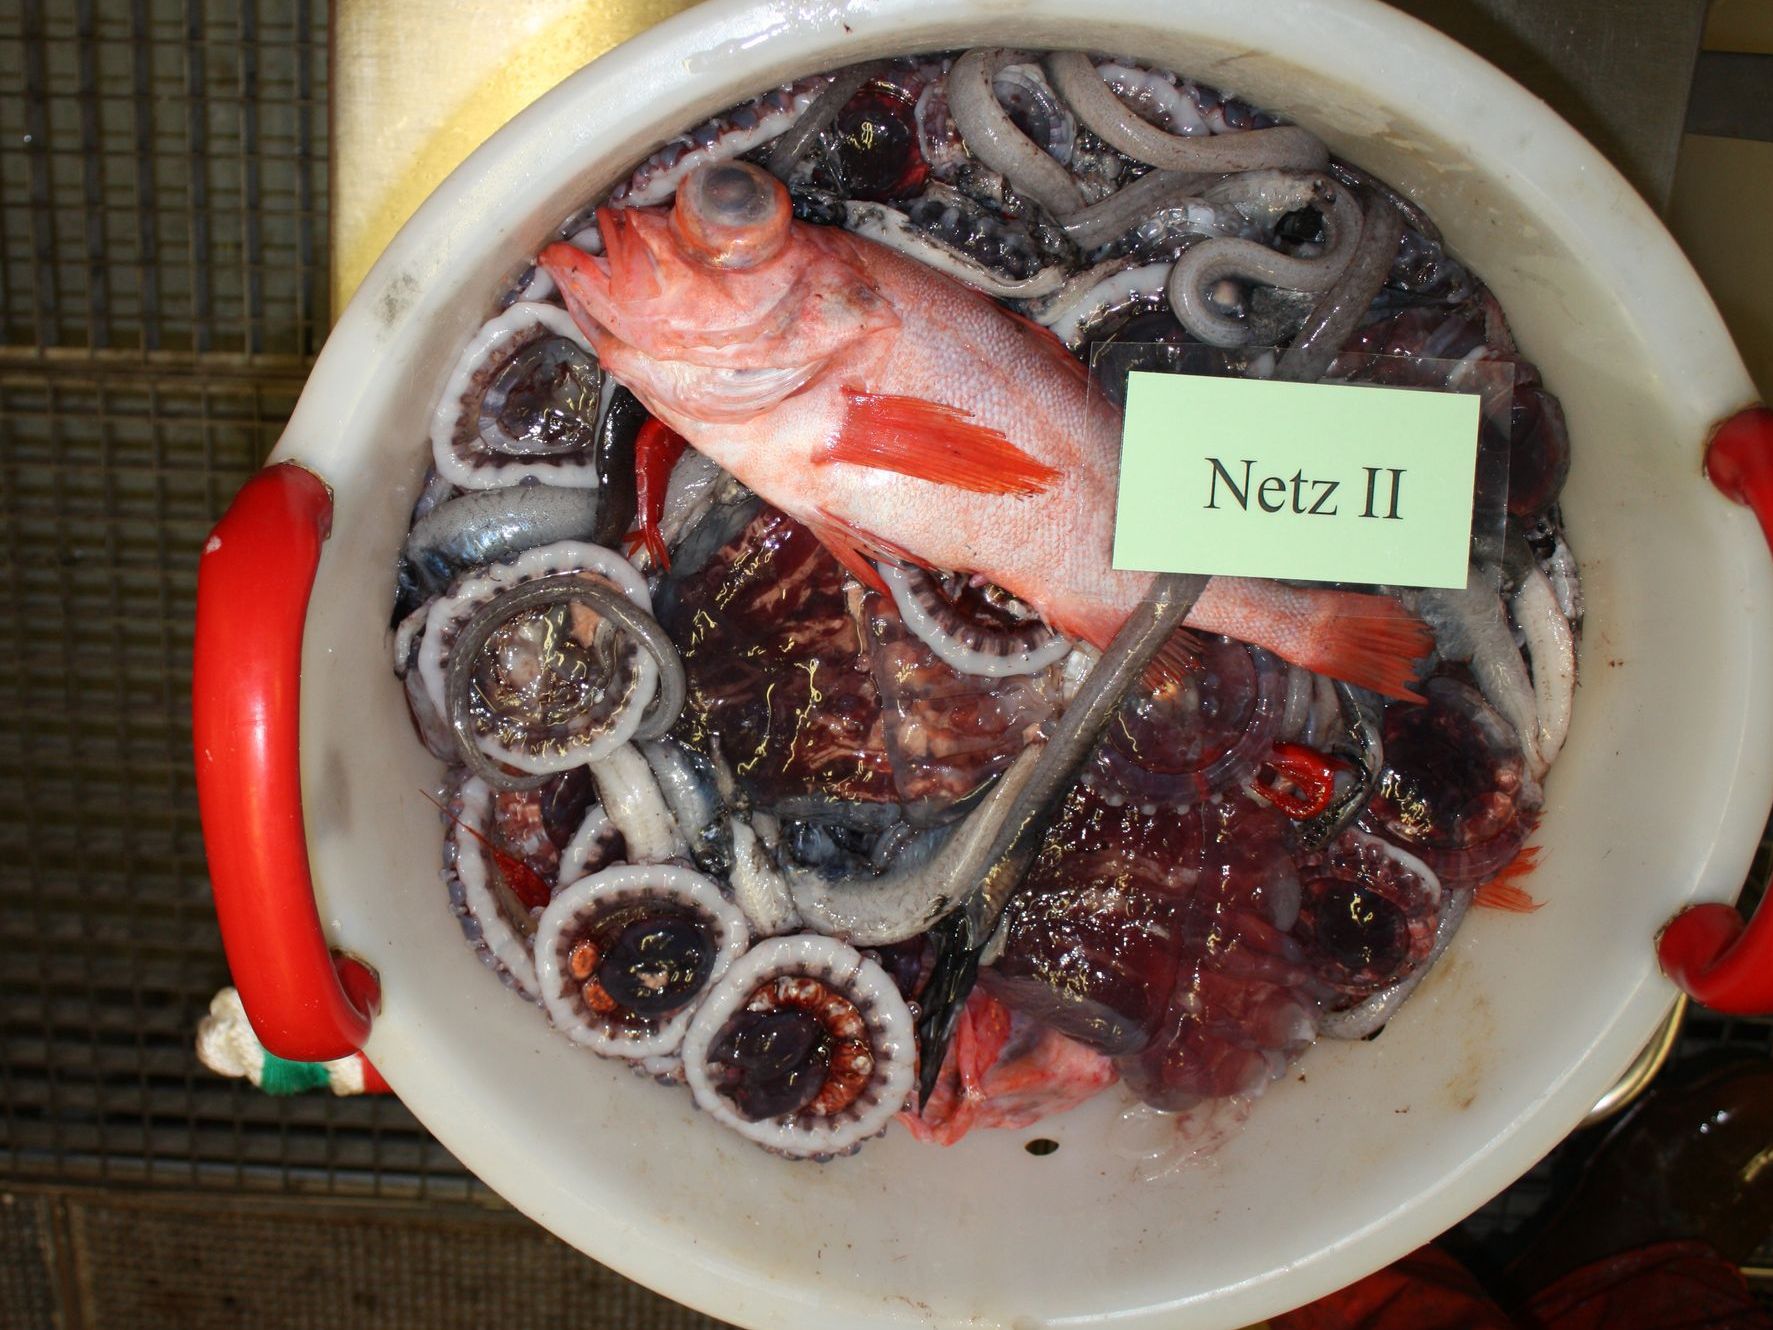 A typical mix of redfish, mesopelagic fish, crustaceans and jellyfish in a sorting basket from the Irminger Sea survey.